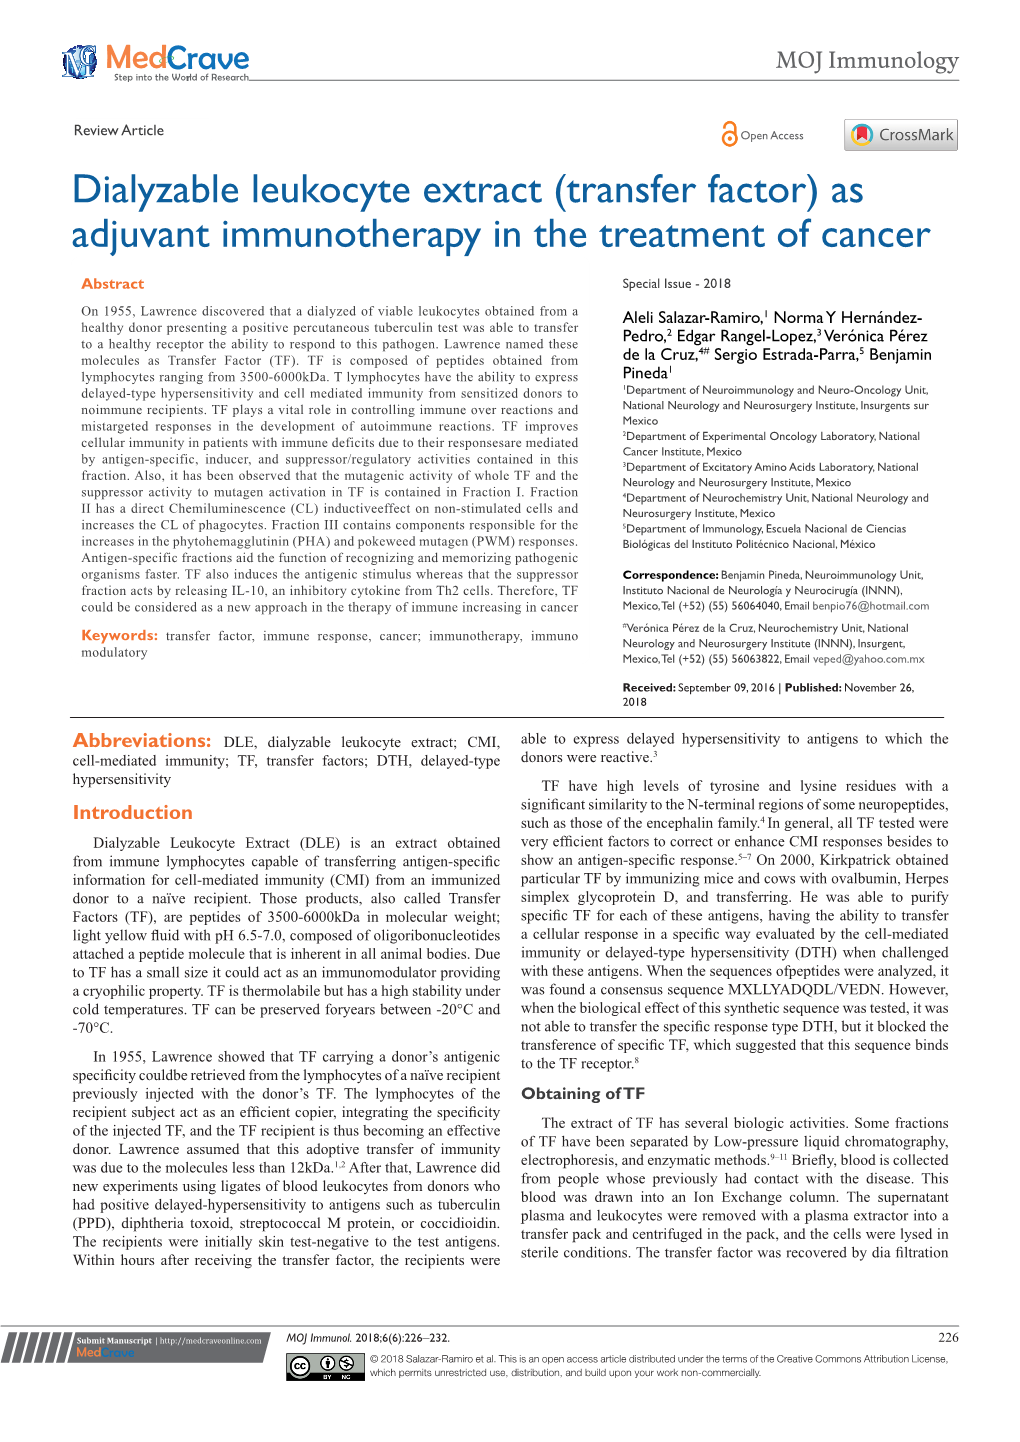 Transfer Factor) As Adjuvant Immunotherapy in the Treatment of Cancer